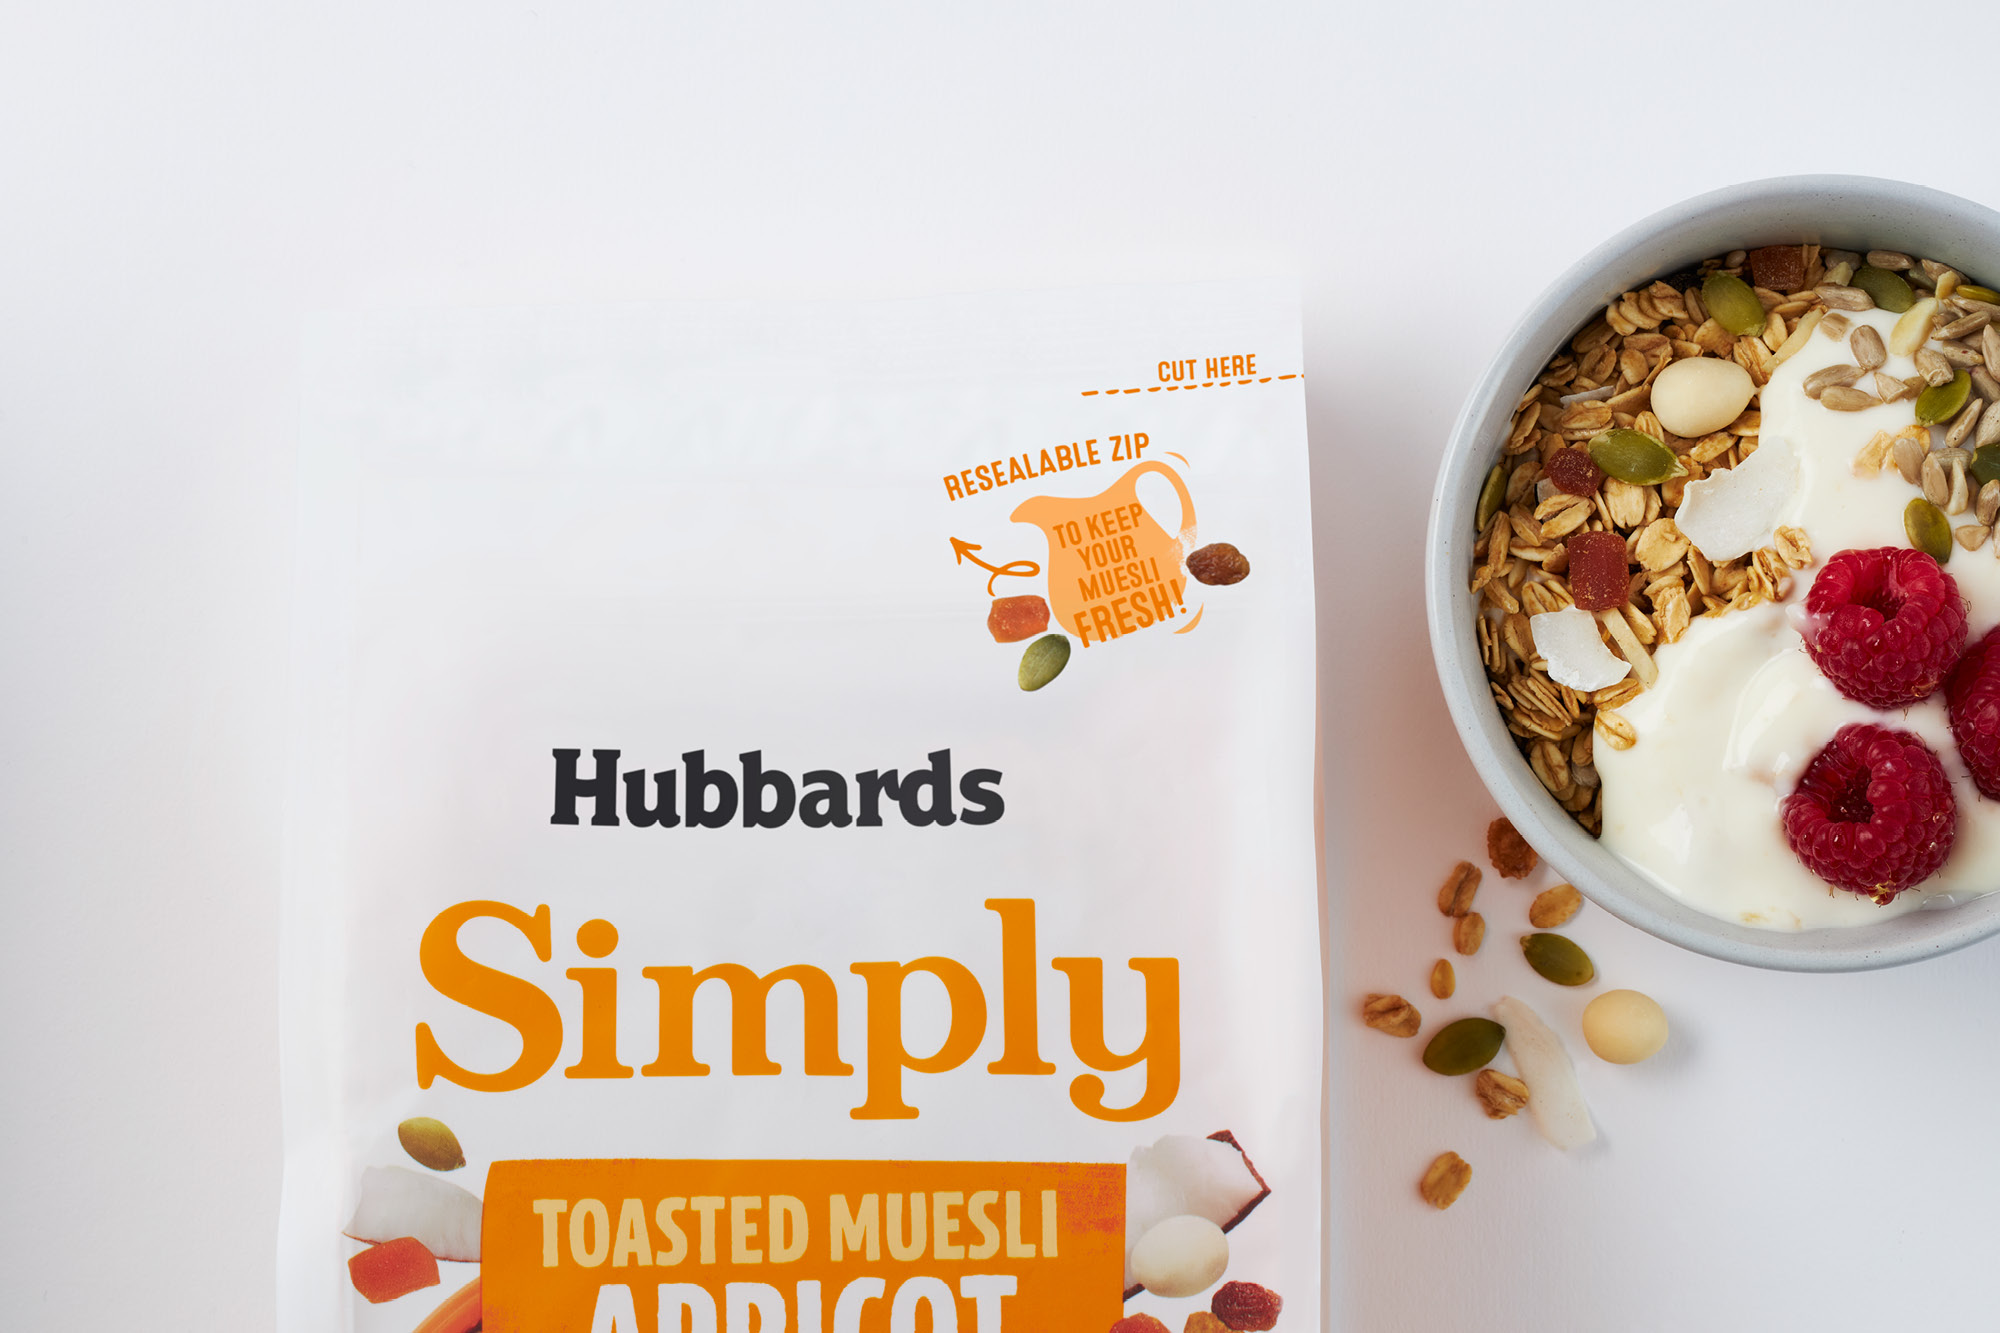 onfire design hubbards simply packaging design 3